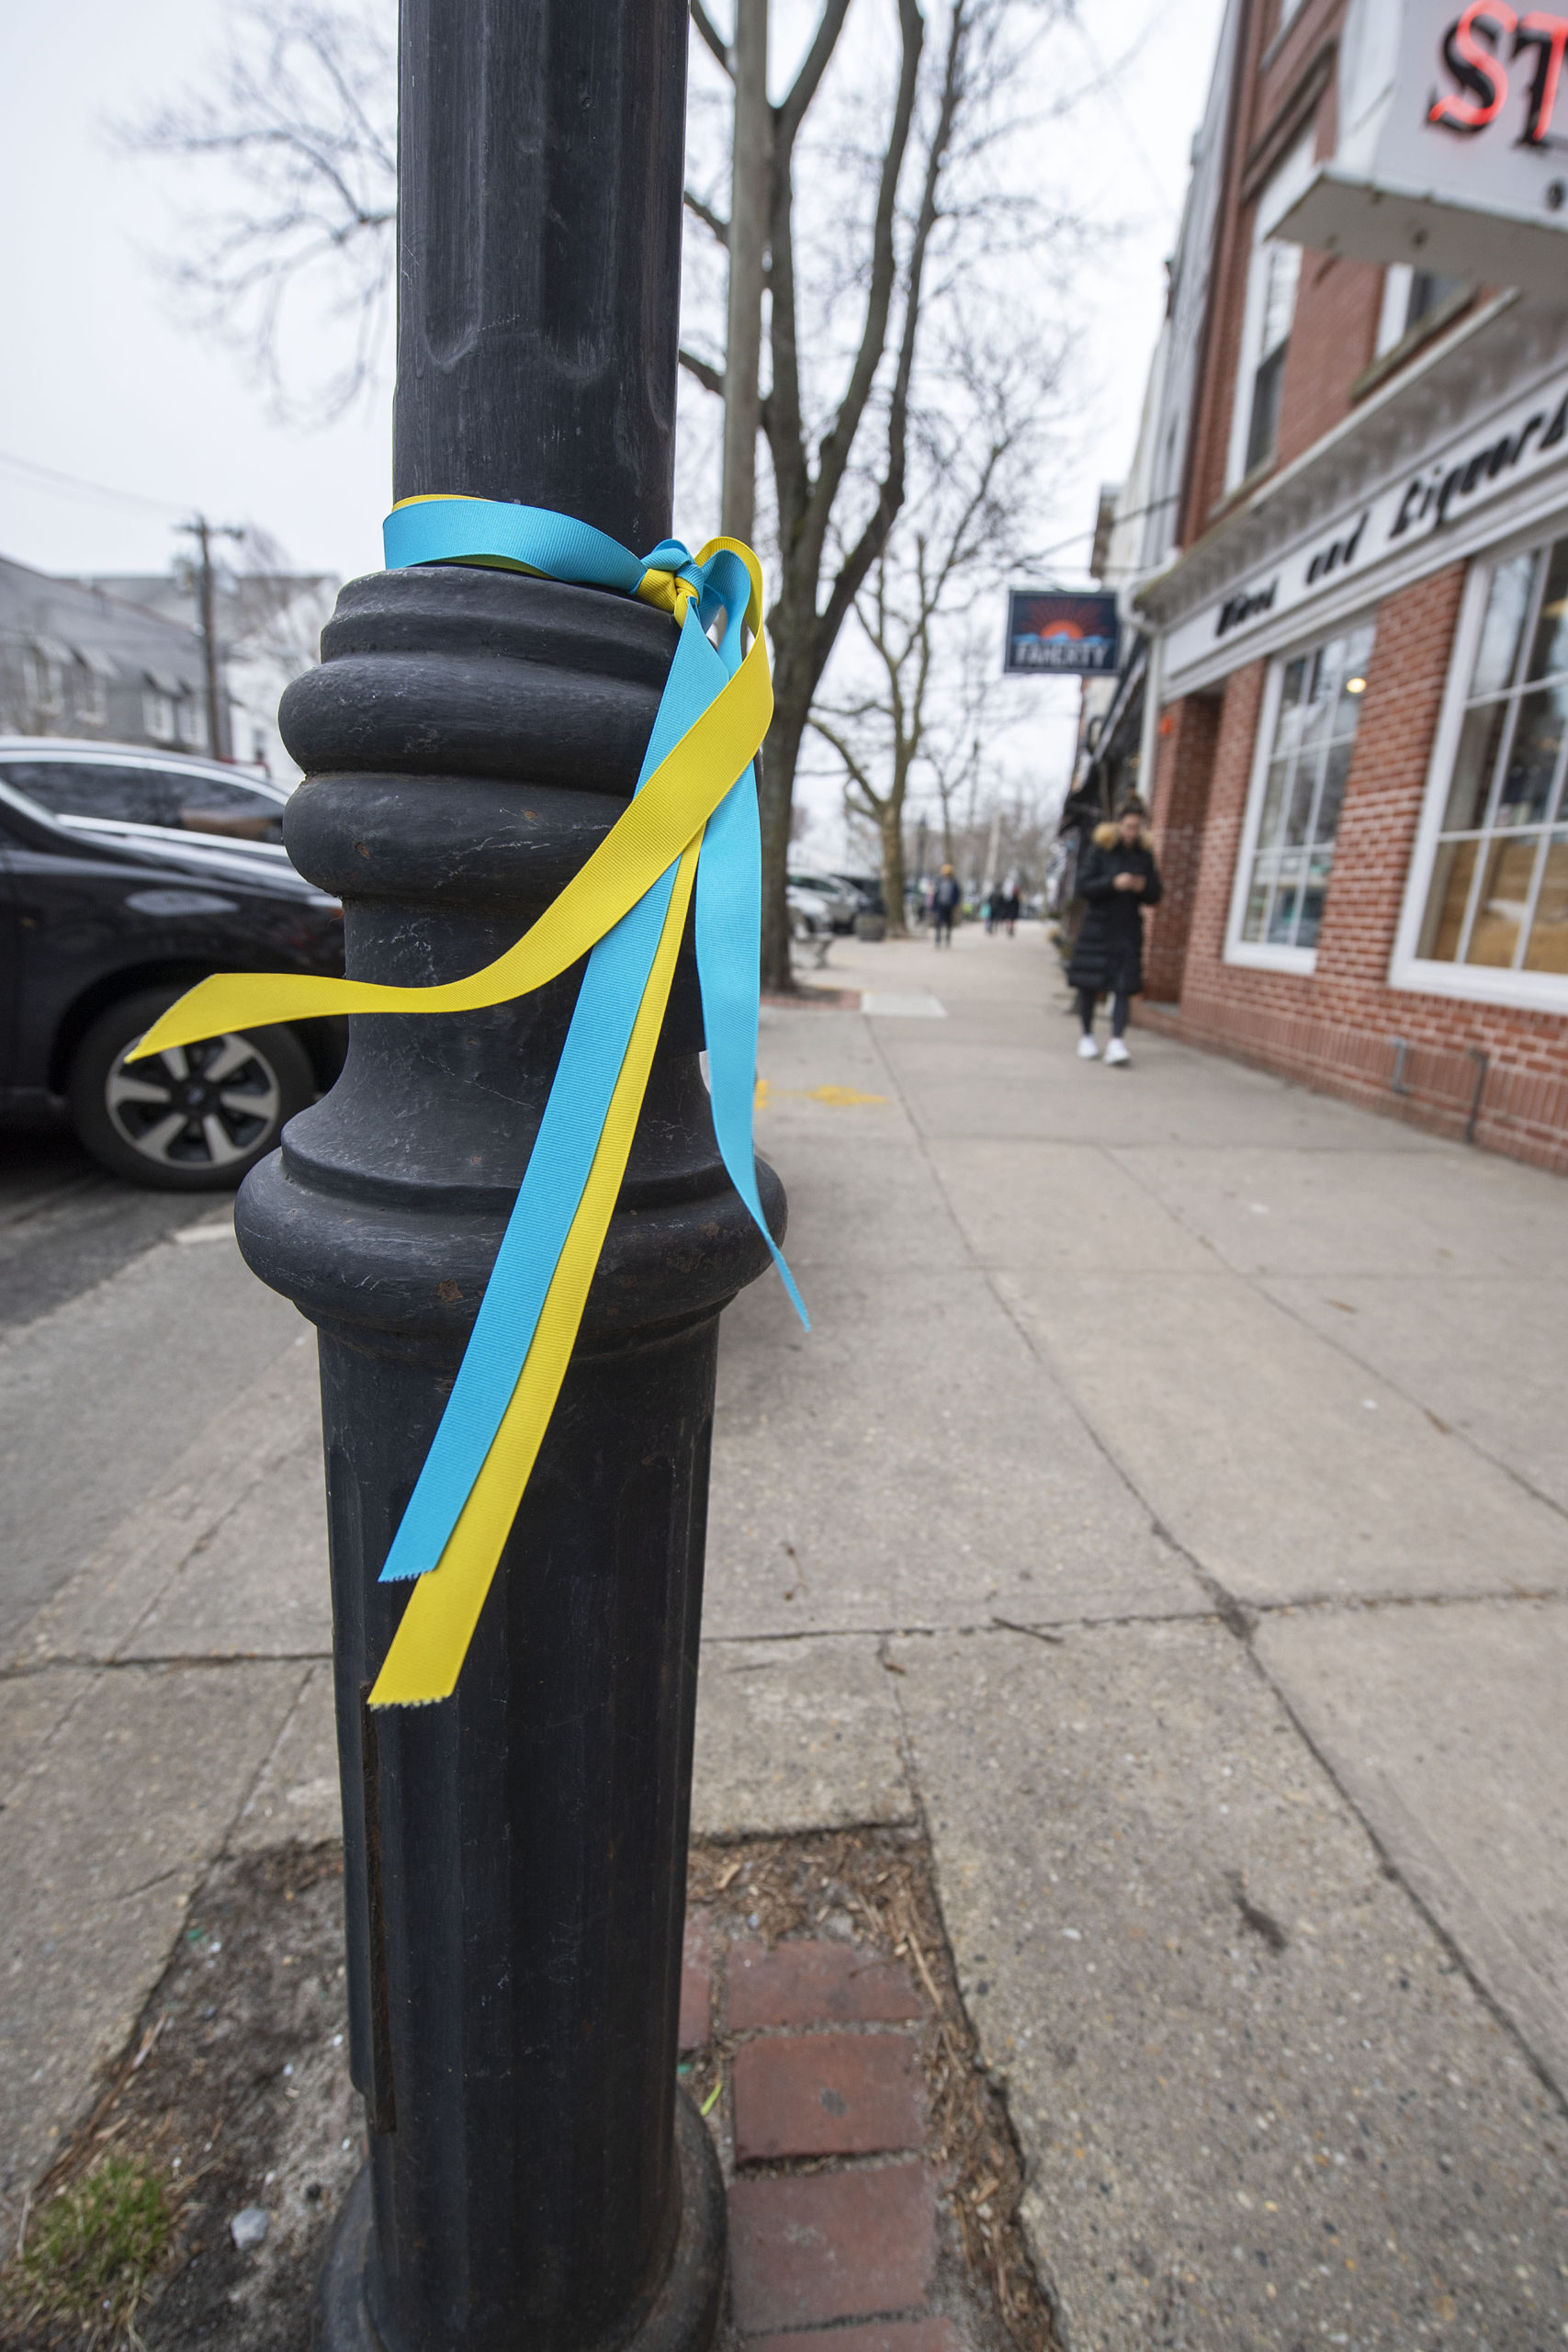 Blue and yellow ribbons were tied around all the street lampposts on Main Street in Sag Harbor in support of Ukraine, as seen on Monday. MICHAEL HELLER